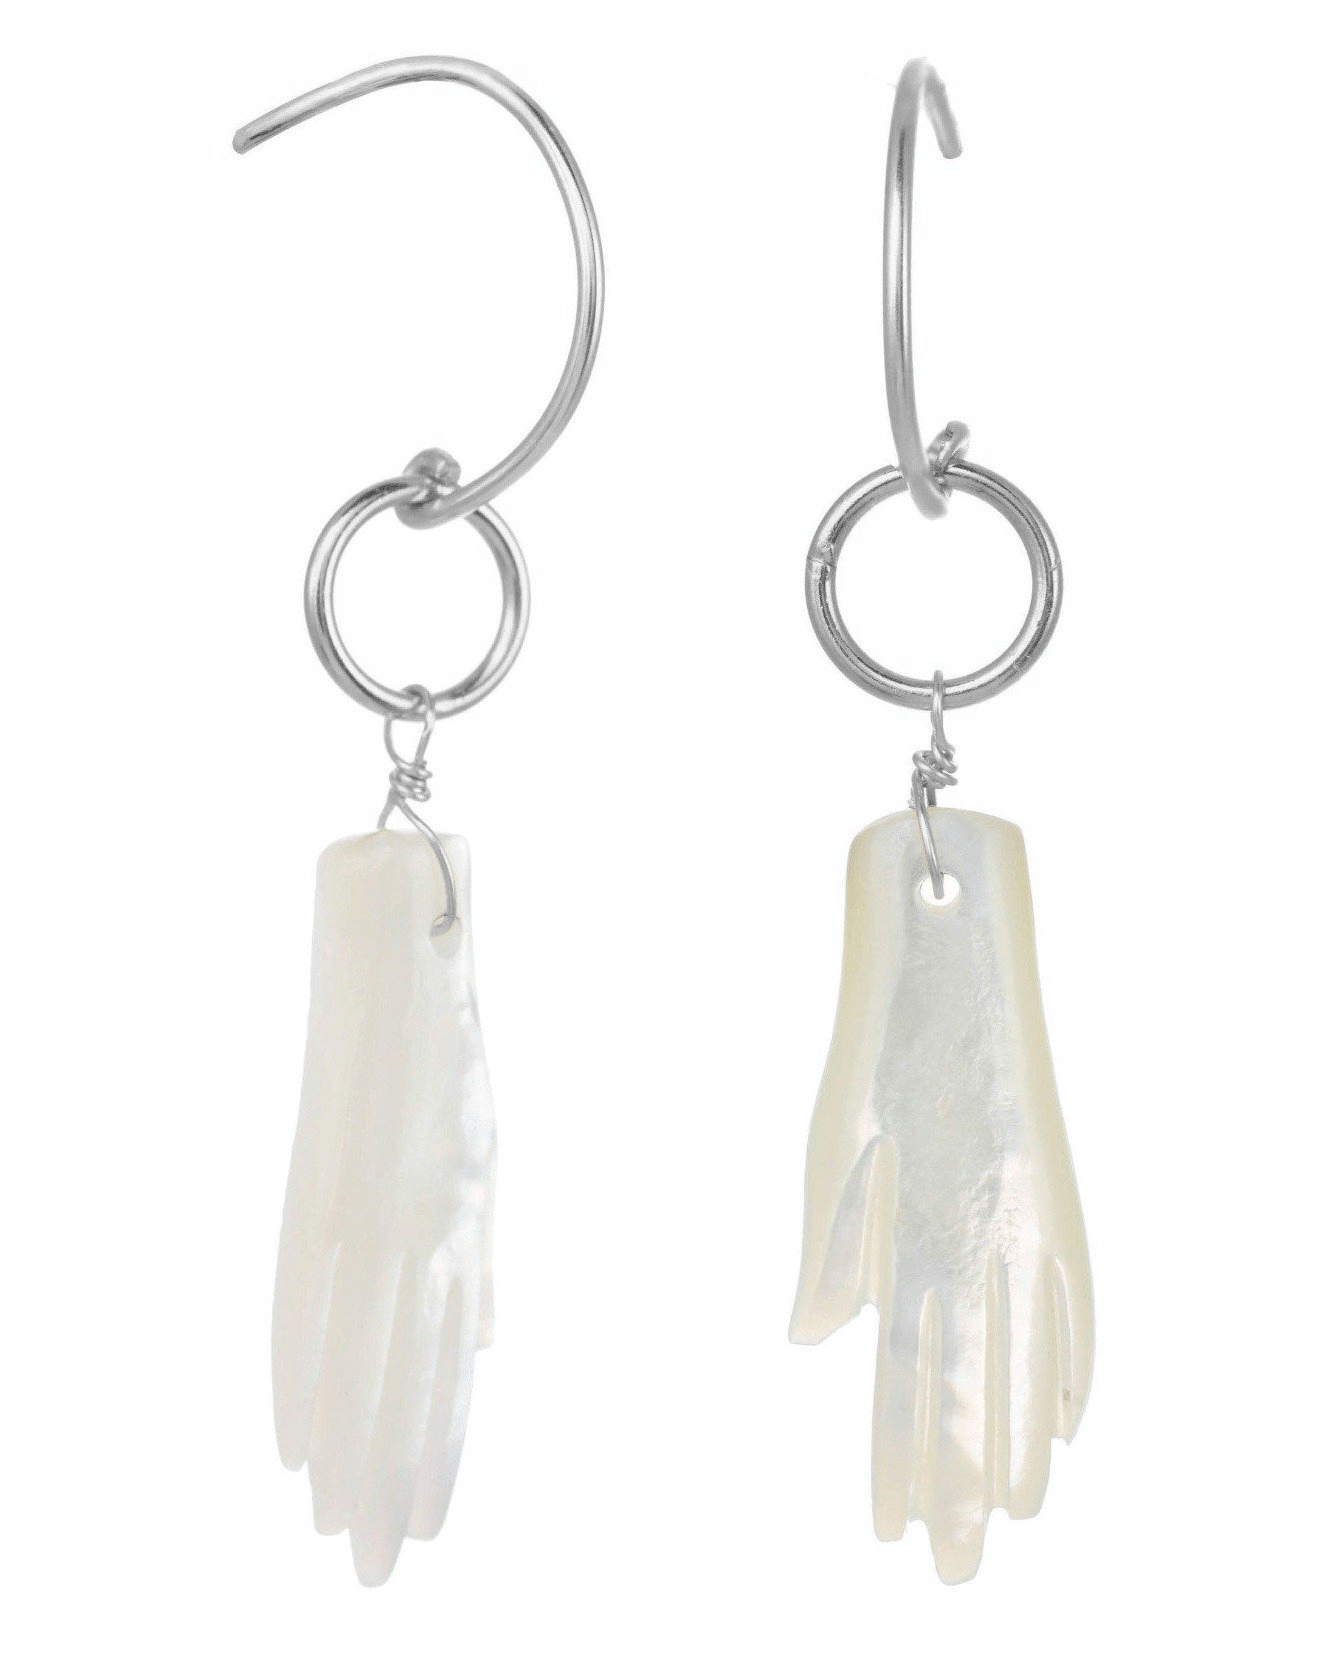 Manos Hoop Earrings by KOZAKH. Hook earrings crafted in Sterling Silver, featuring a hand carved Mother of Pearl hand.